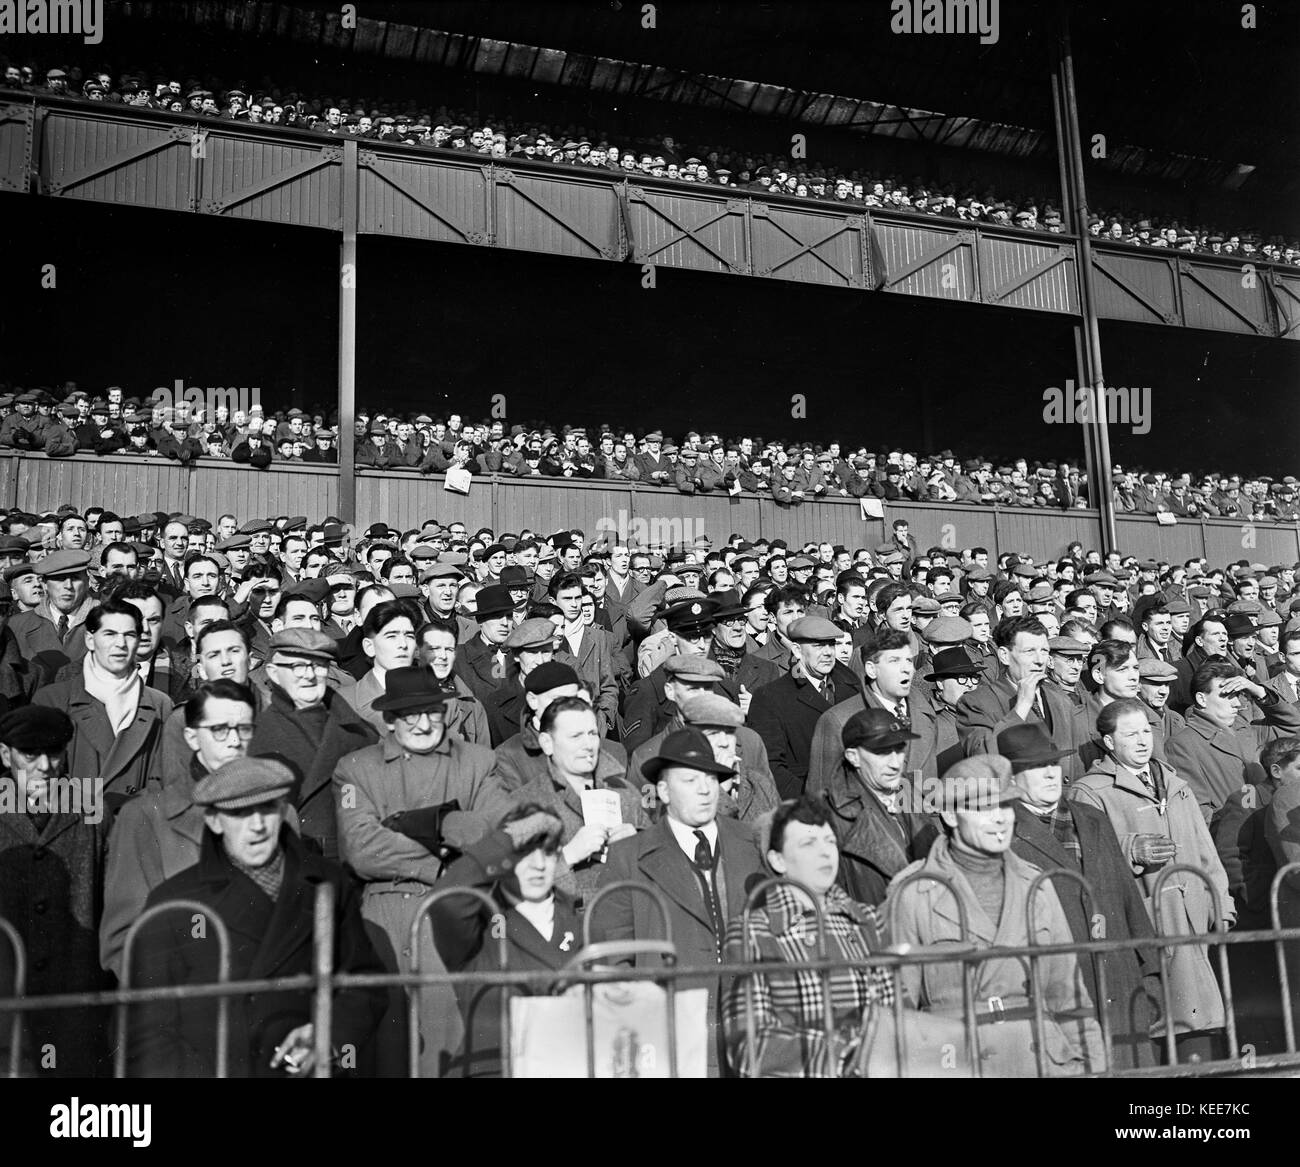 Derby County fans faces in the crowd in attendance at the Osmaston End of the Baseball Ground c1955.  Photograph by Tony Henshaw   *** Local Caption *** From the original glass negative From the wholly-owned original negative. Stock Photo